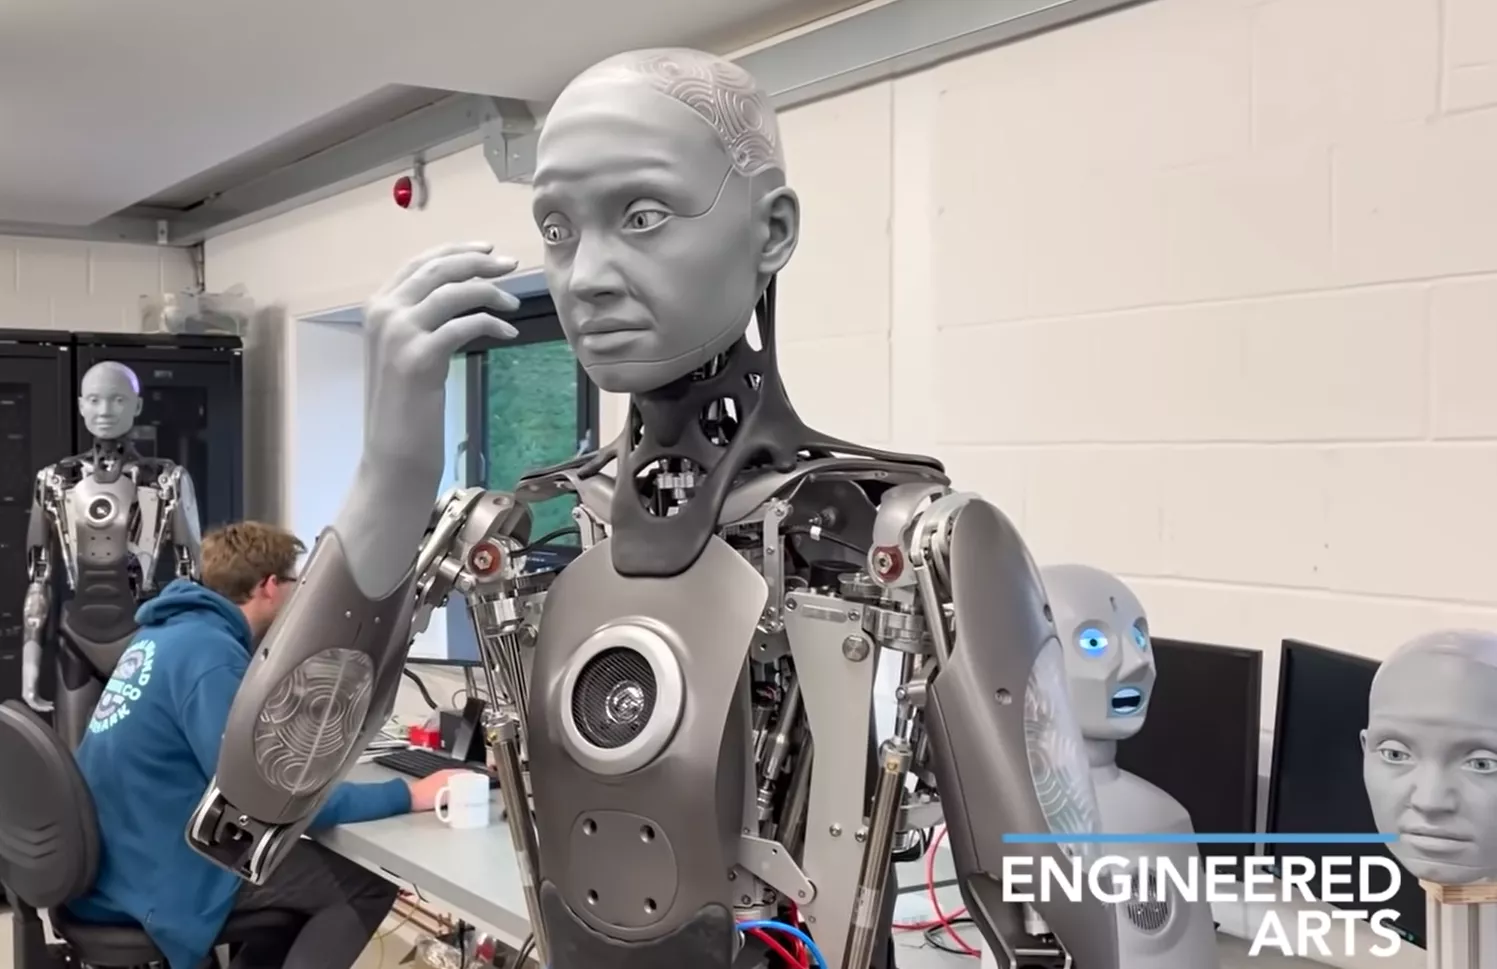 Schotel atoom B olie Video of Realistic Humanoid Robot Has the Internet Terrified: 'Oh My God'